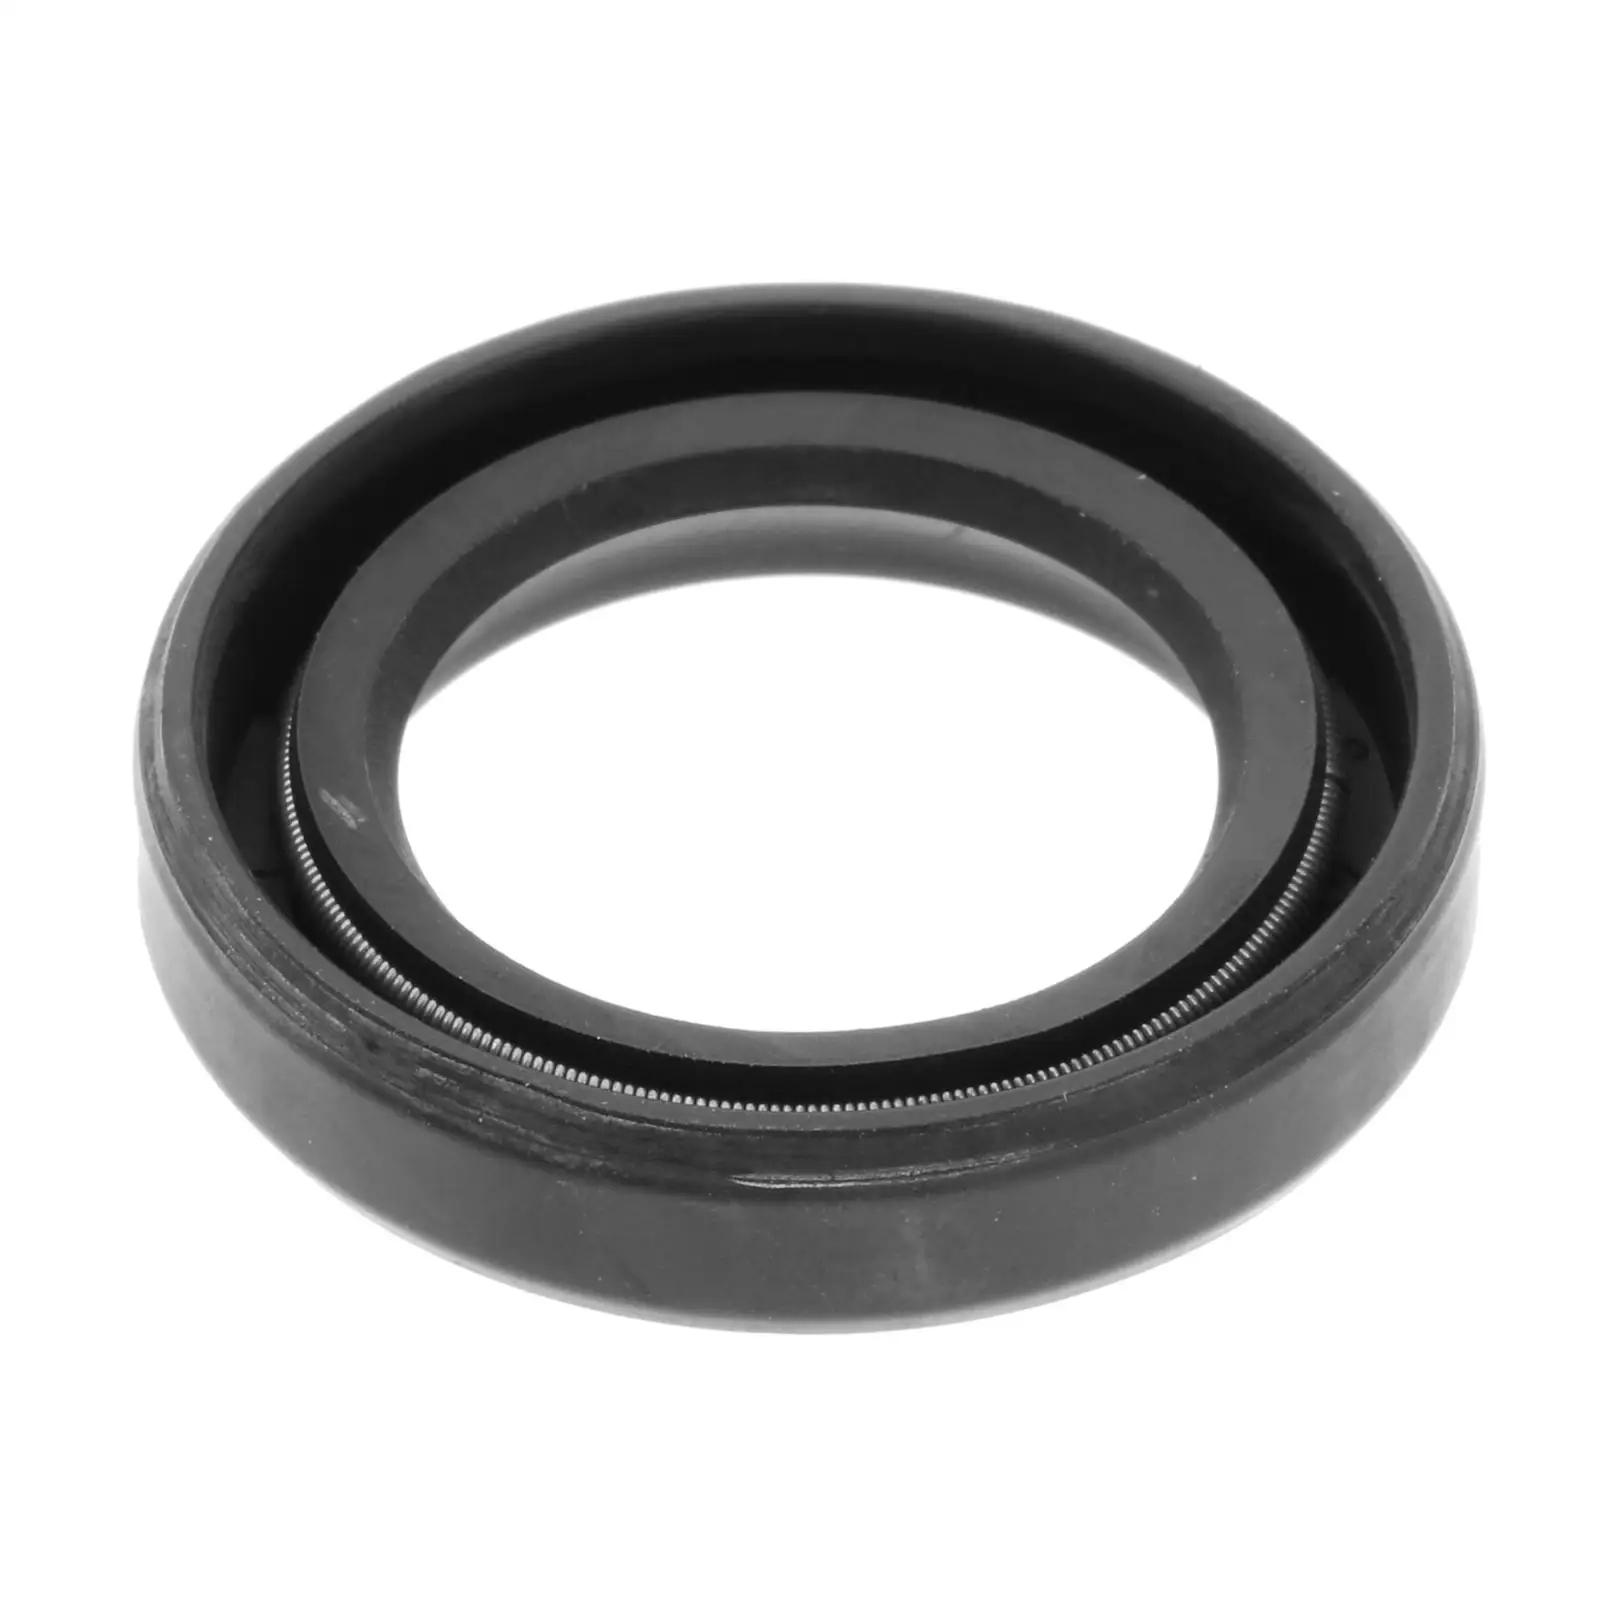 93101-20048 Oil Seal S-type Replaces for Yamaha Outboard Motor Parsun,Hidea Parts 8HP, 9HP, 9.9HP, 15HP, 20HP, 25HP